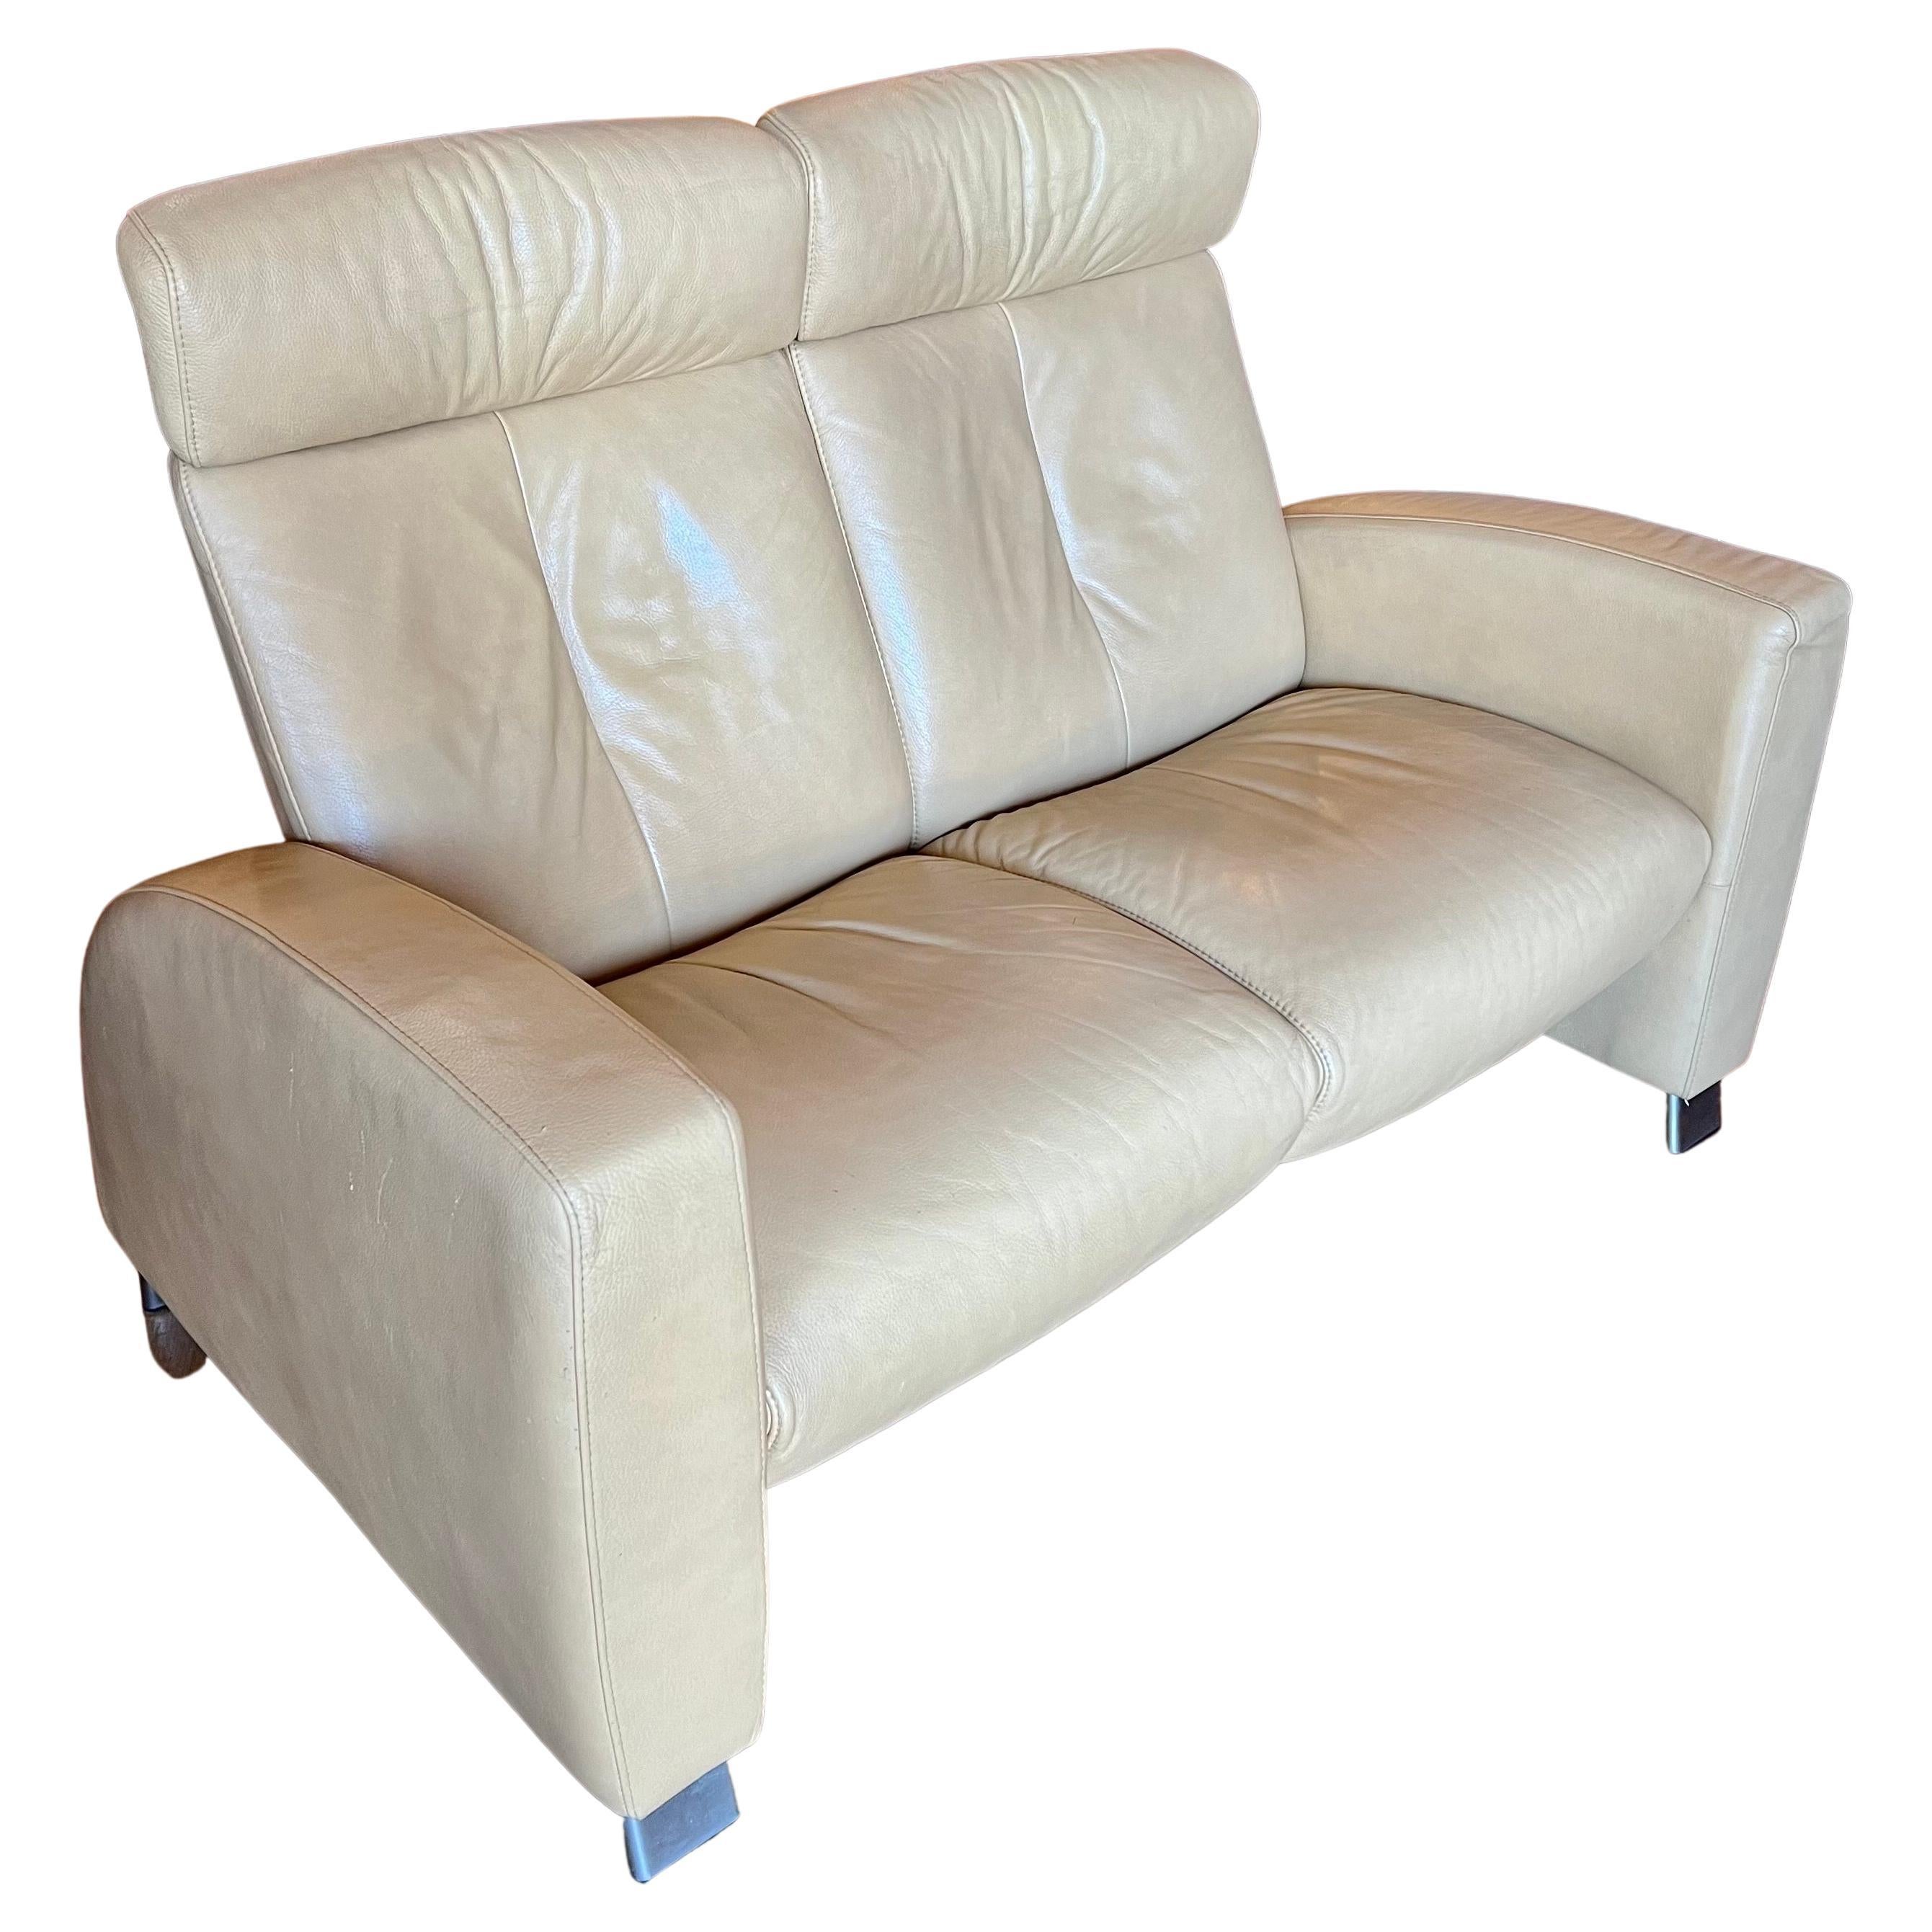 Striking tall back leather recliner circa 2002 in yellow cream color, nice and comfy beautiful lines out of production, Arion model light wear some scratches on the side as shown. Due to age and wear.